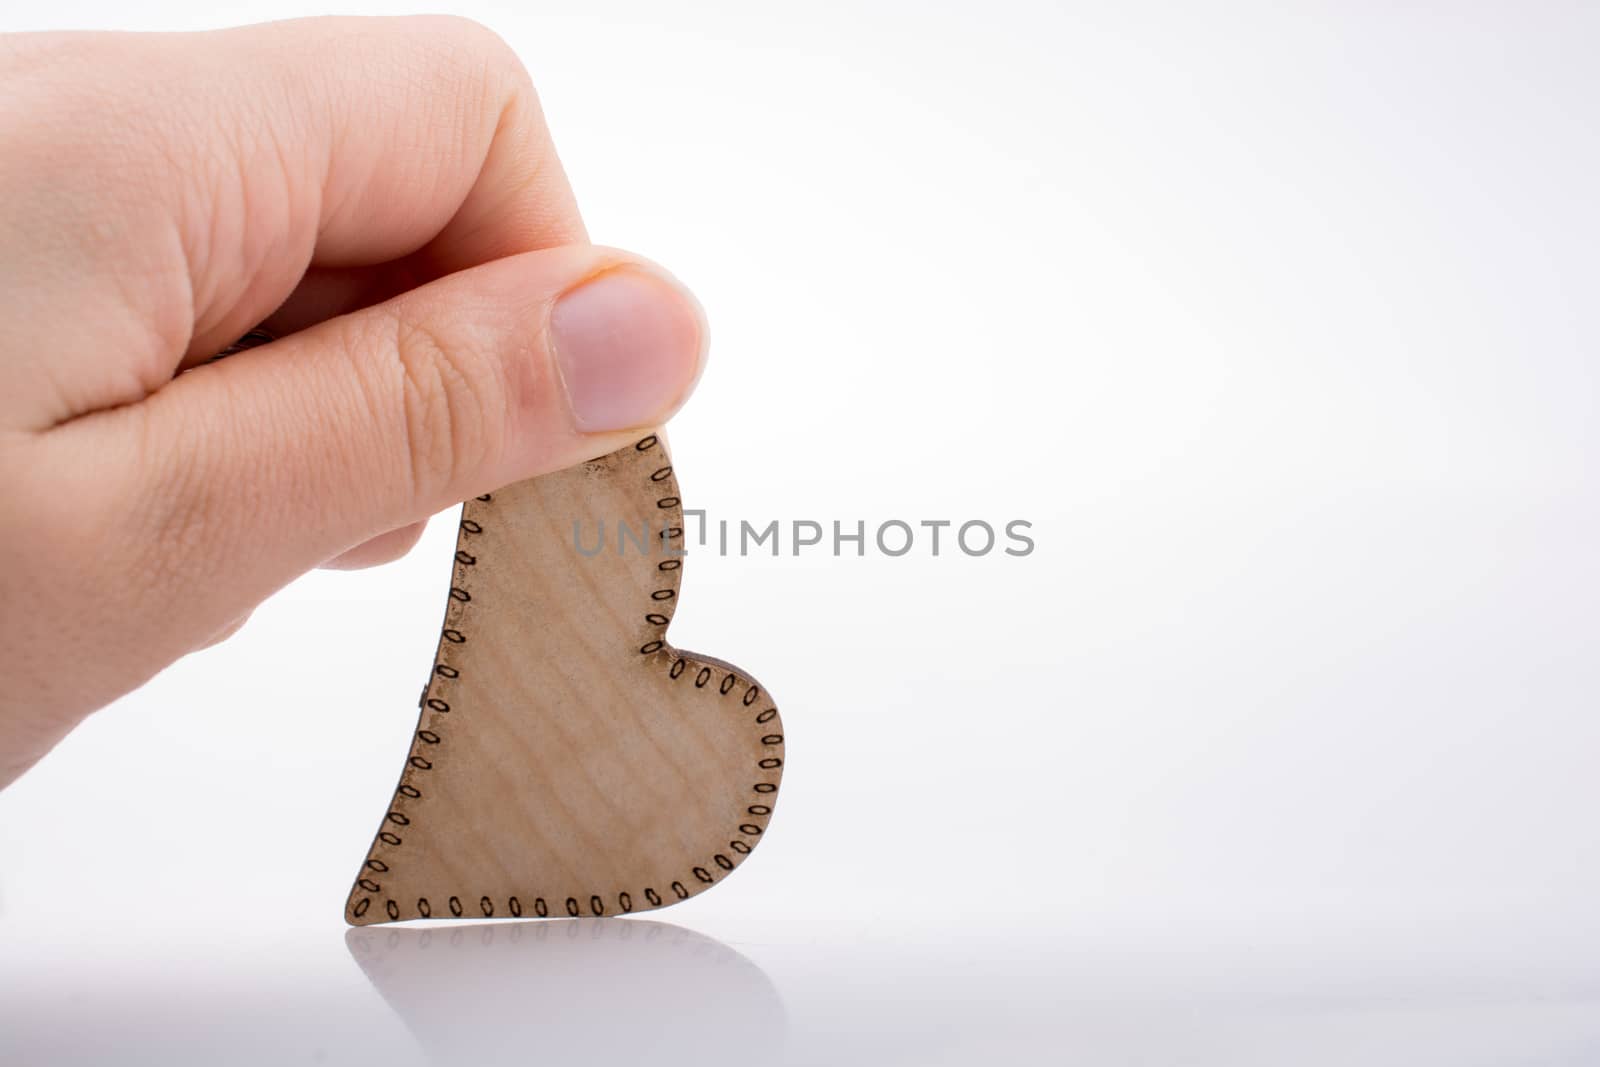 Heart shaped wooden object in the hand